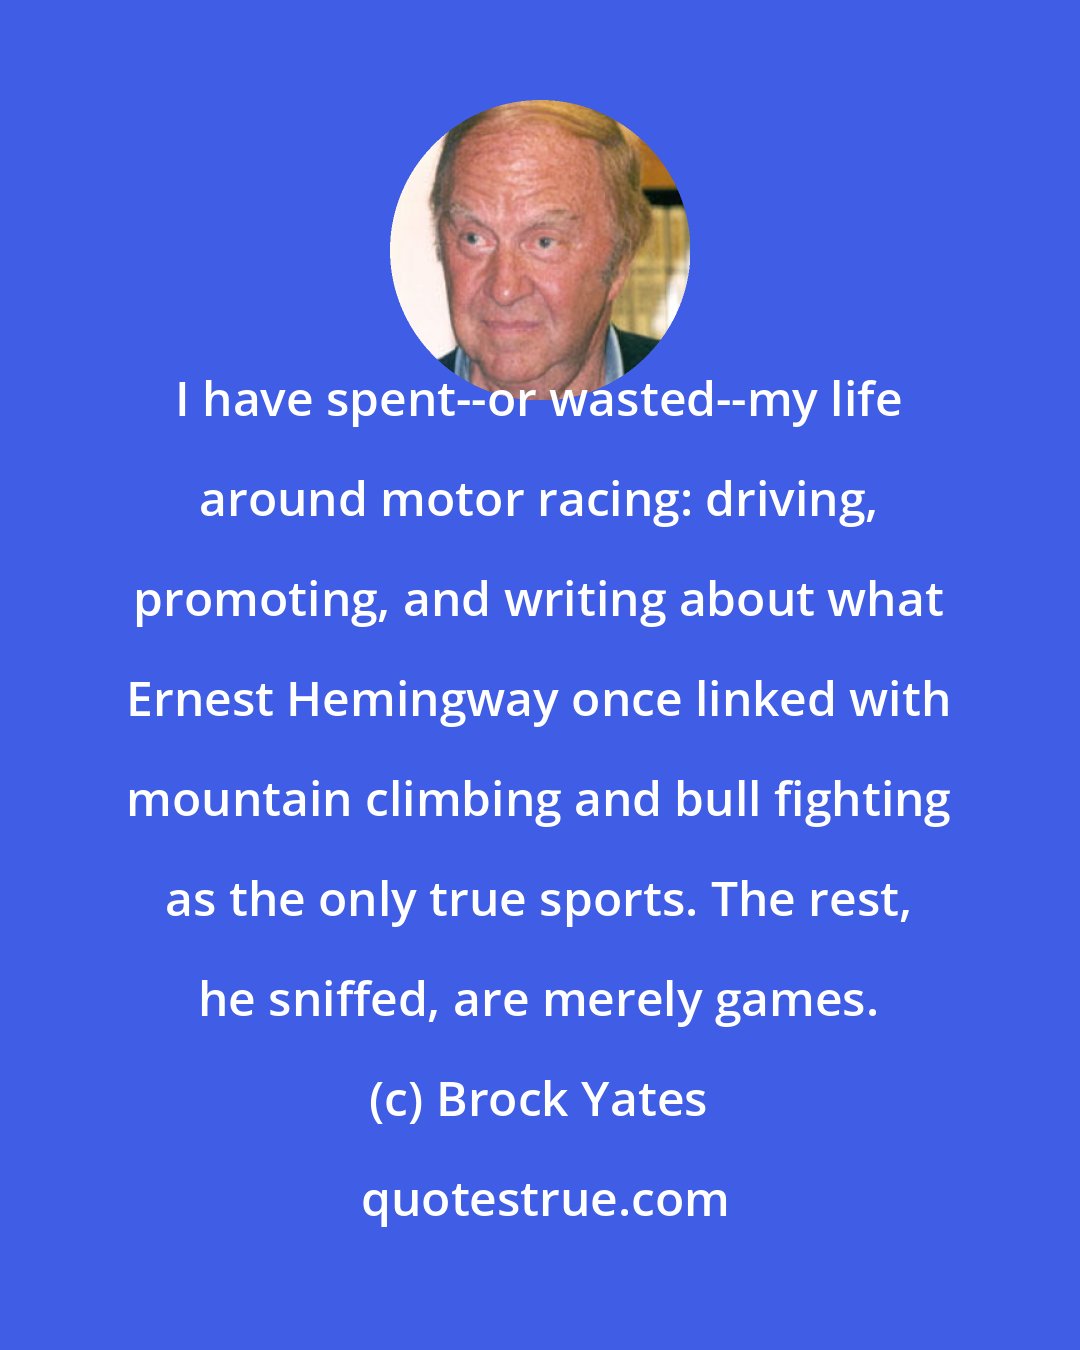 Brock Yates: I have spent--or wasted--my life around motor racing: driving, promoting, and writing about what Ernest Hemingway once linked with mountain climbing and bull fighting as the only true sports. The rest, he sniffed, are merely games.